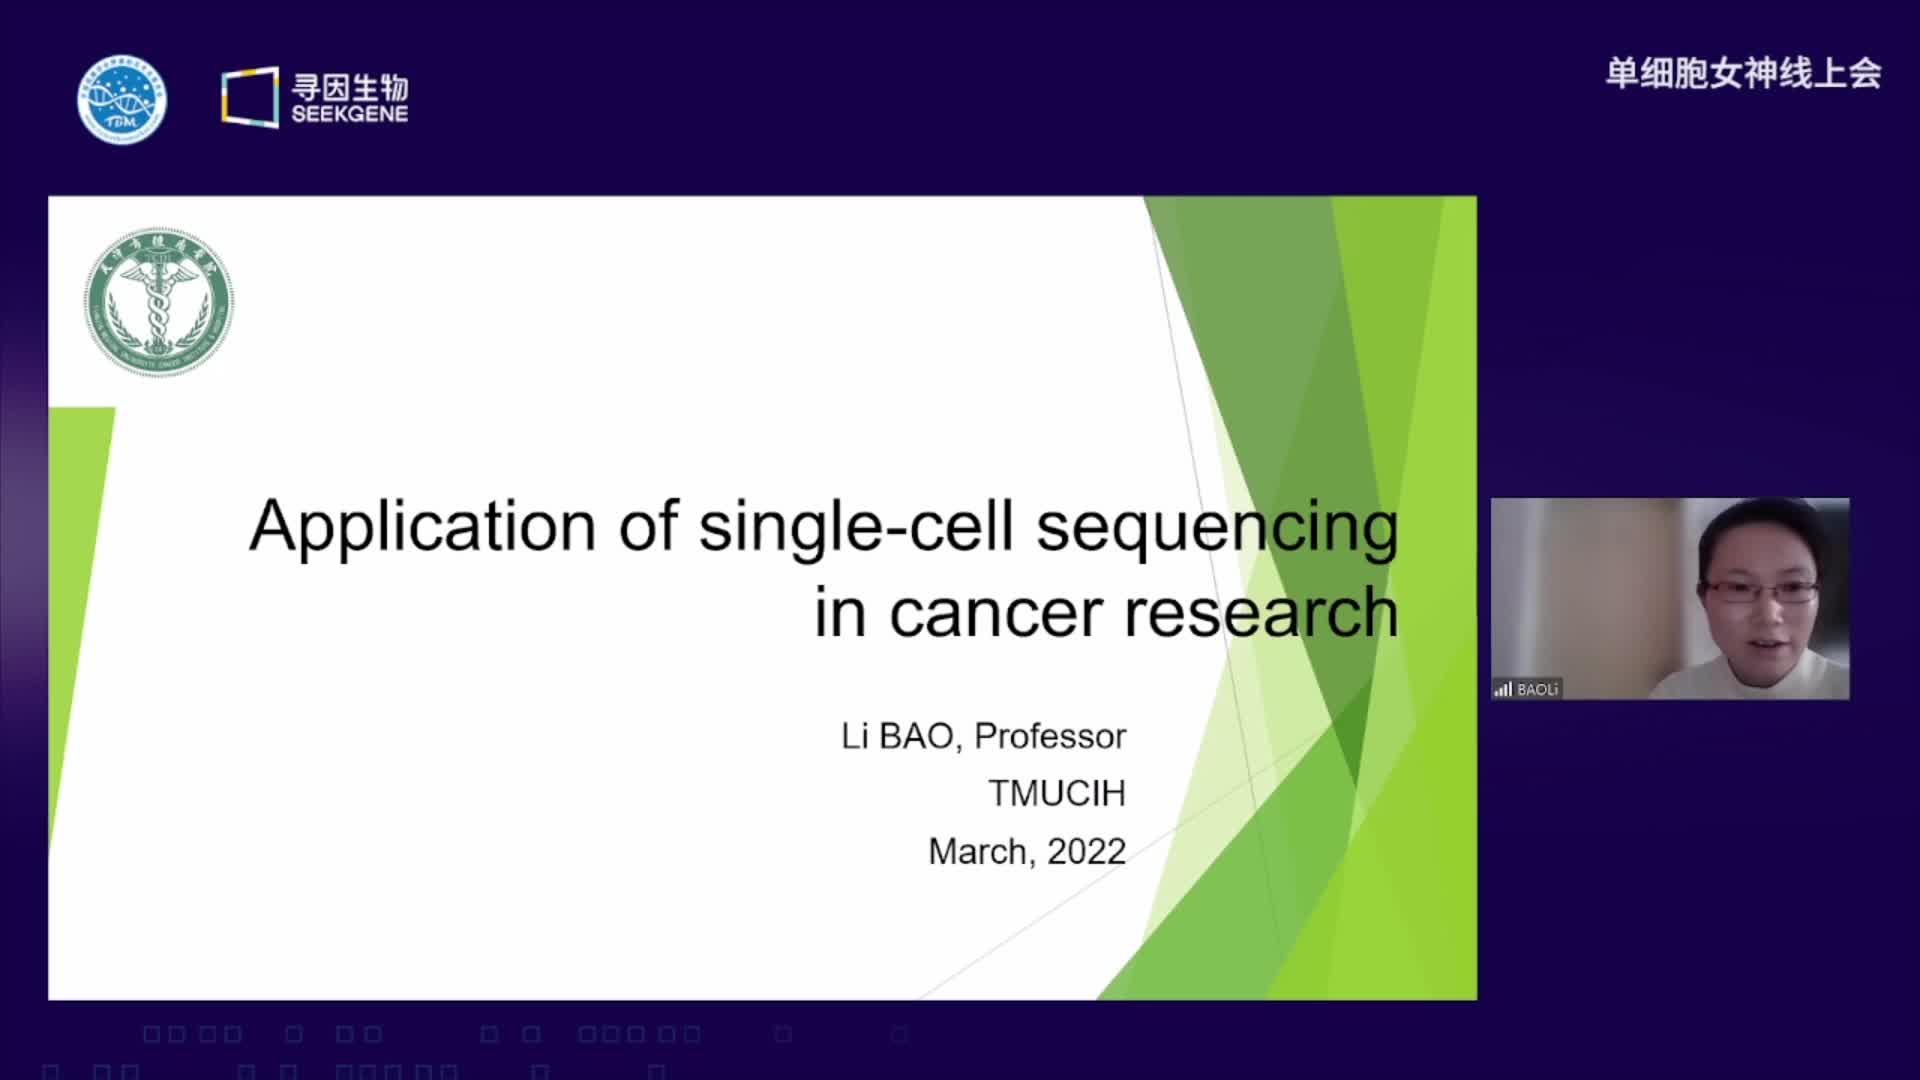 Application of single-cell sequencing in cancer research